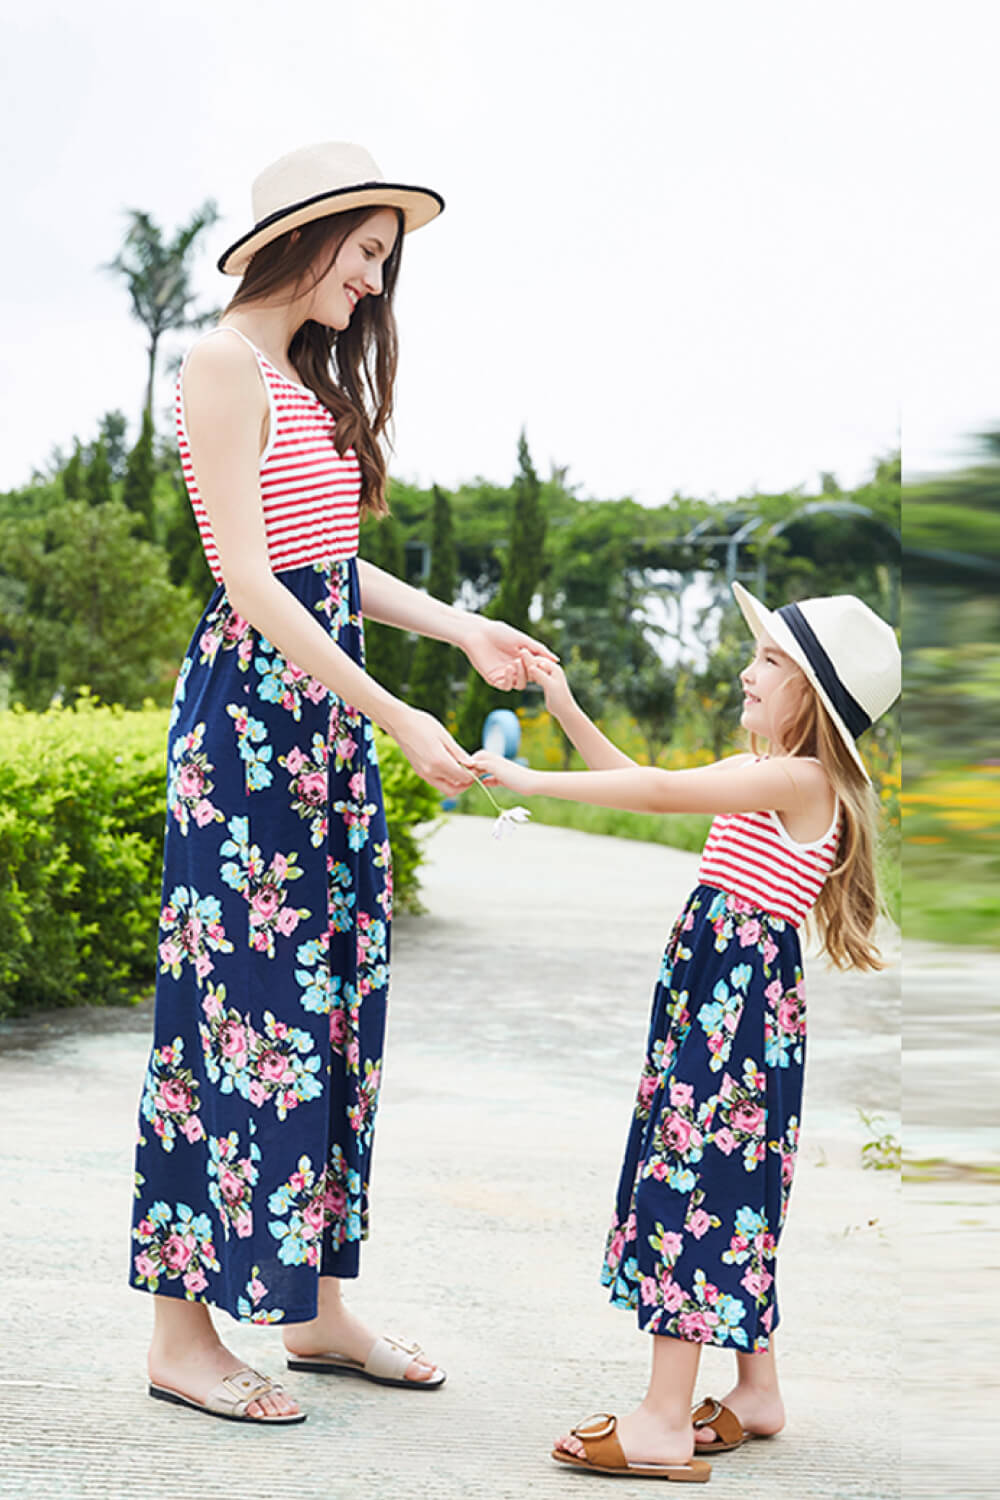 Women Striped Floral Sleeveless Dress (Mommy and Me Set)